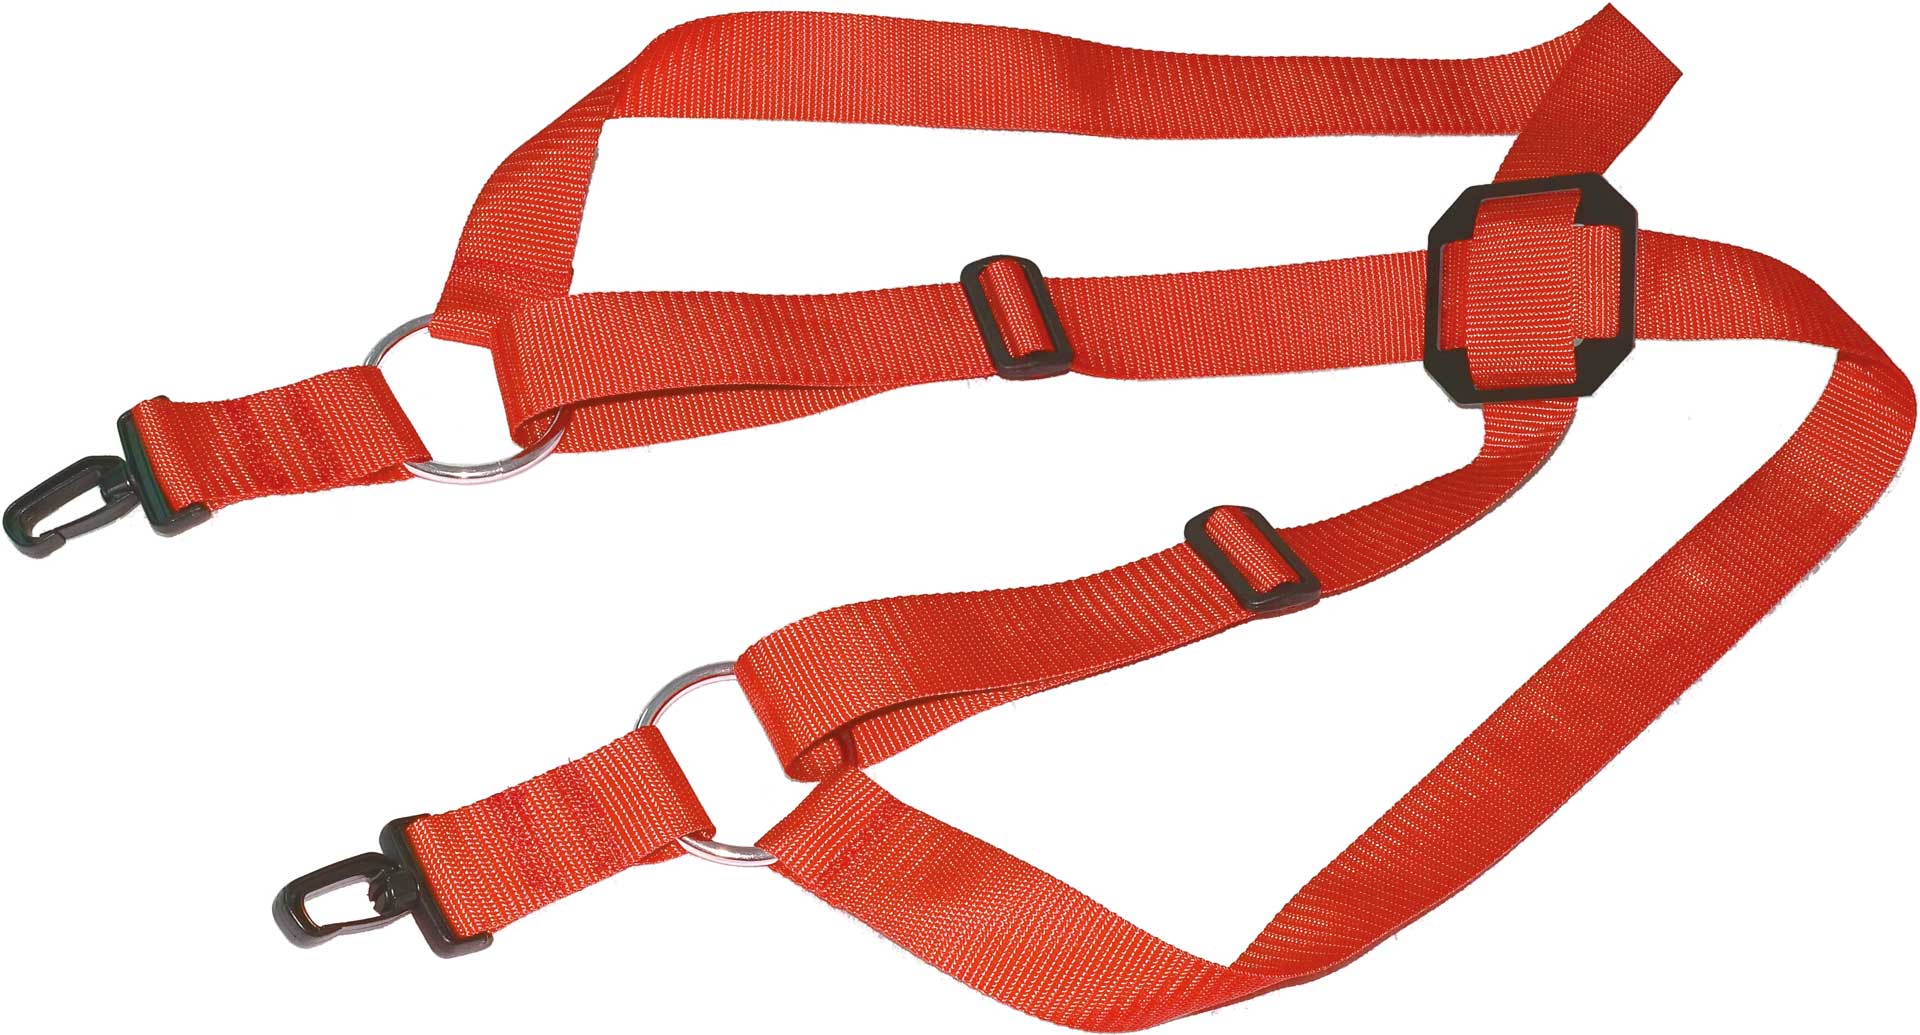 AHLTEC Comfort cross harness for transmitter consoles in red